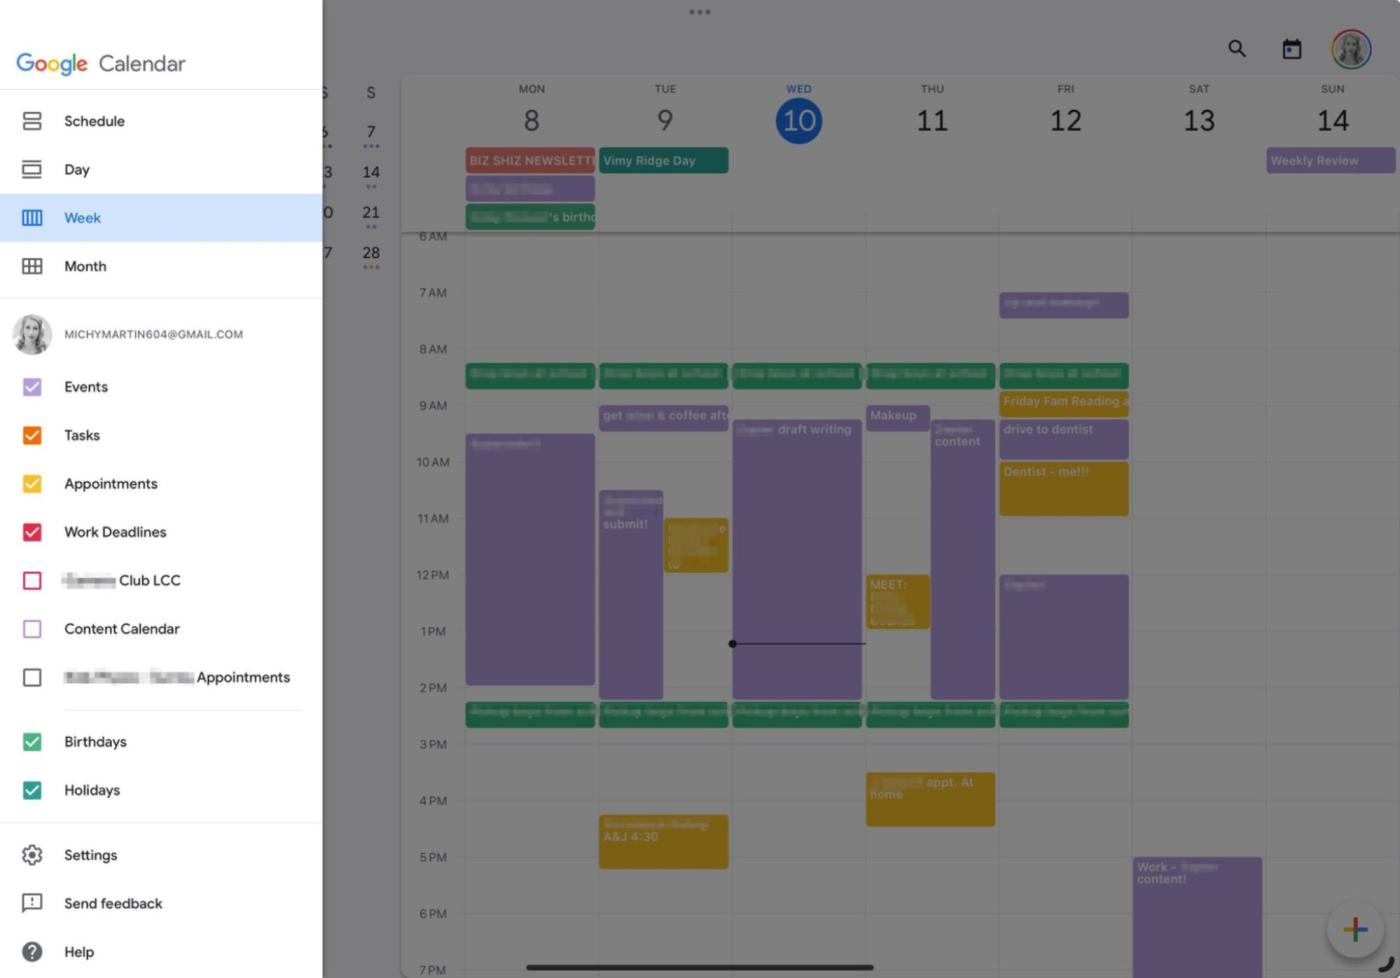 Google Calendar, our pick for one of the best iPad productivity apps for calendar management